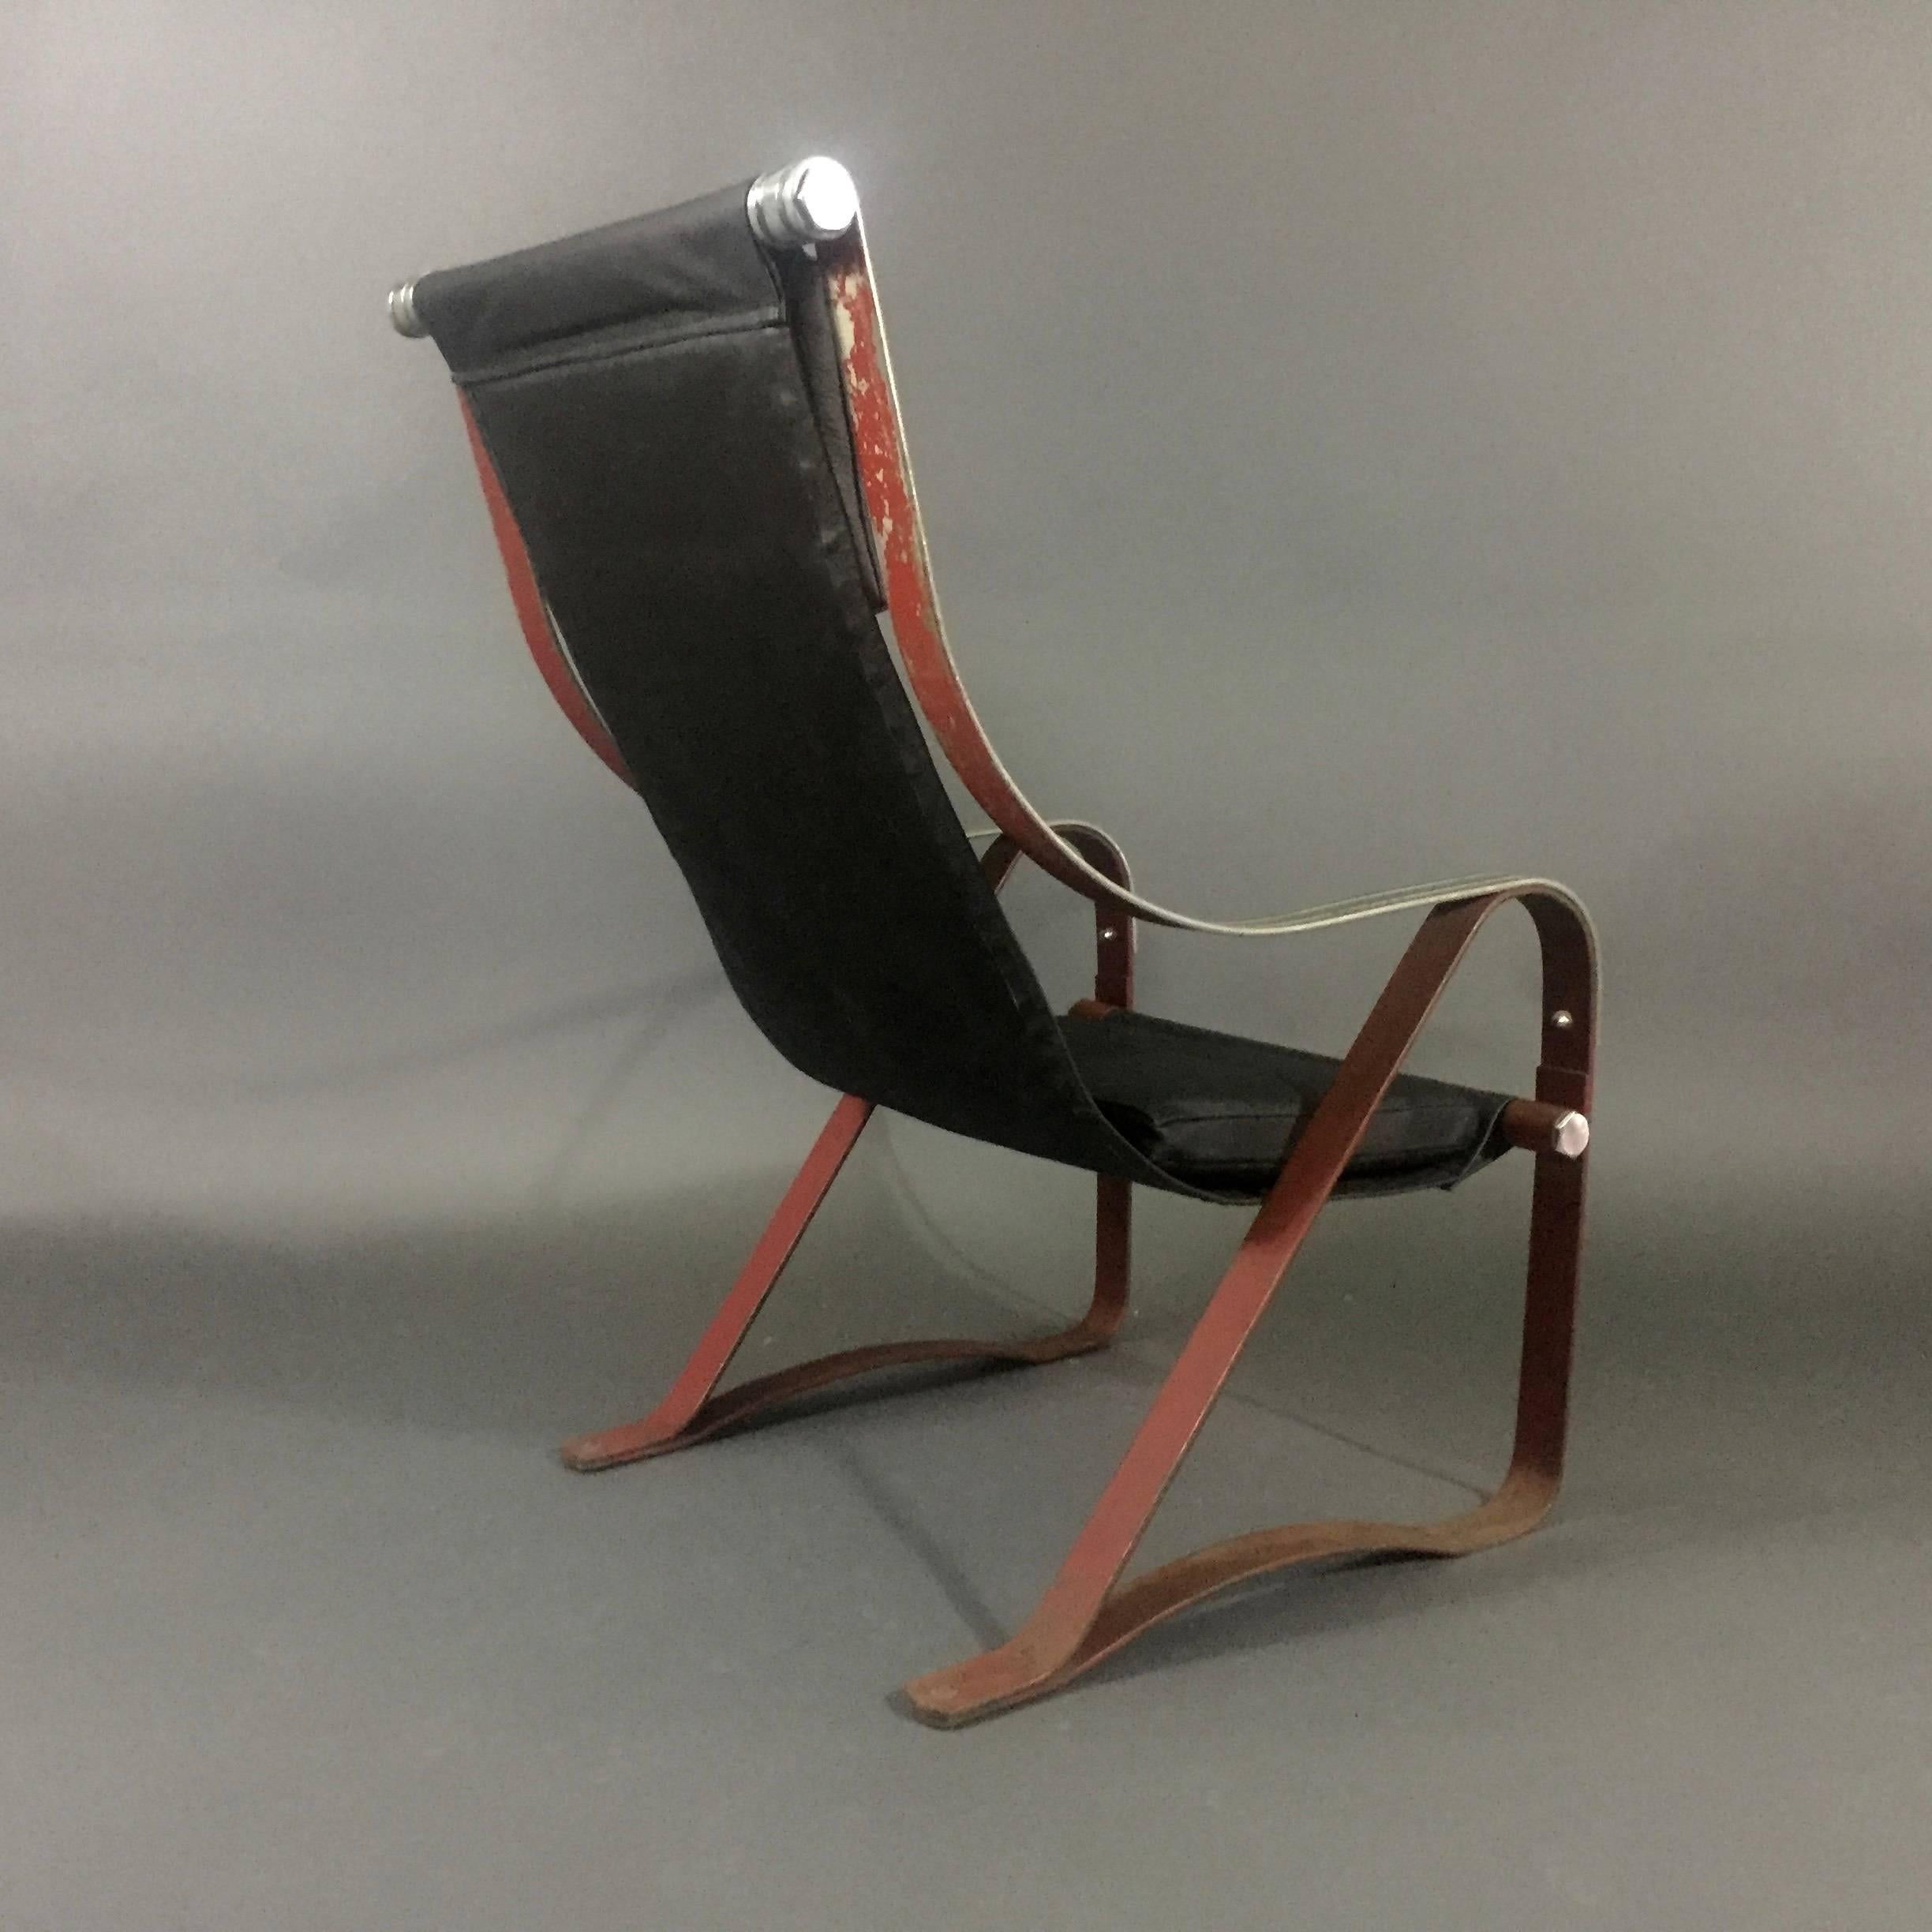 McKay Craft Sling Chair, Leather and Steel, 1930s In Good Condition For Sale In Hudson, NY